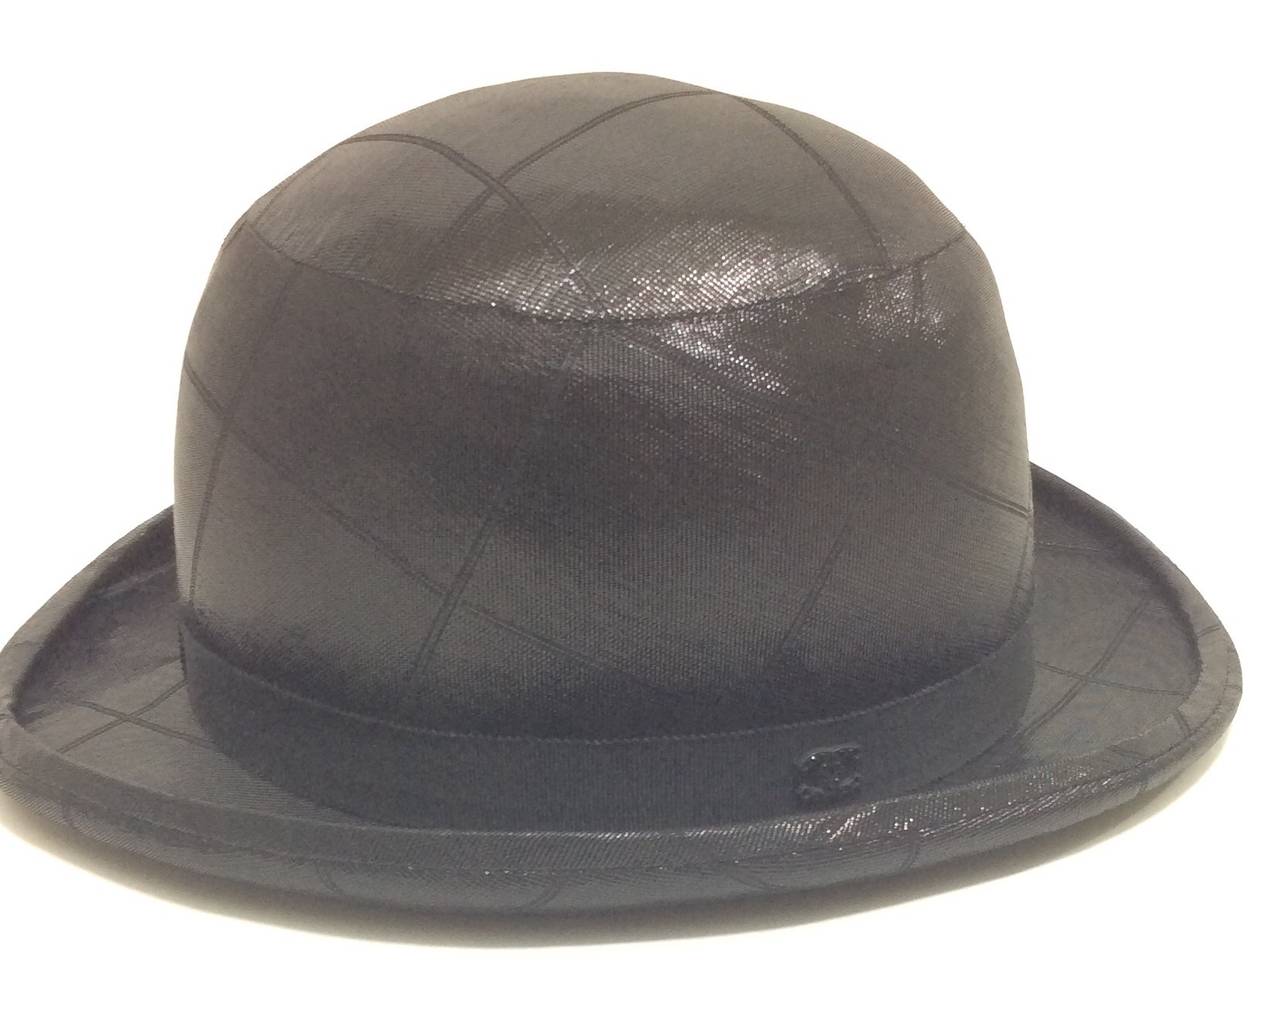 Metallic black Chanel bowler hat. Diamond stitching throughout. Double CC logo on hat band. The inside of the hat is lined in Chanel logo fabric. 
Made of 76% silk and 24% polyamide 
Size 56